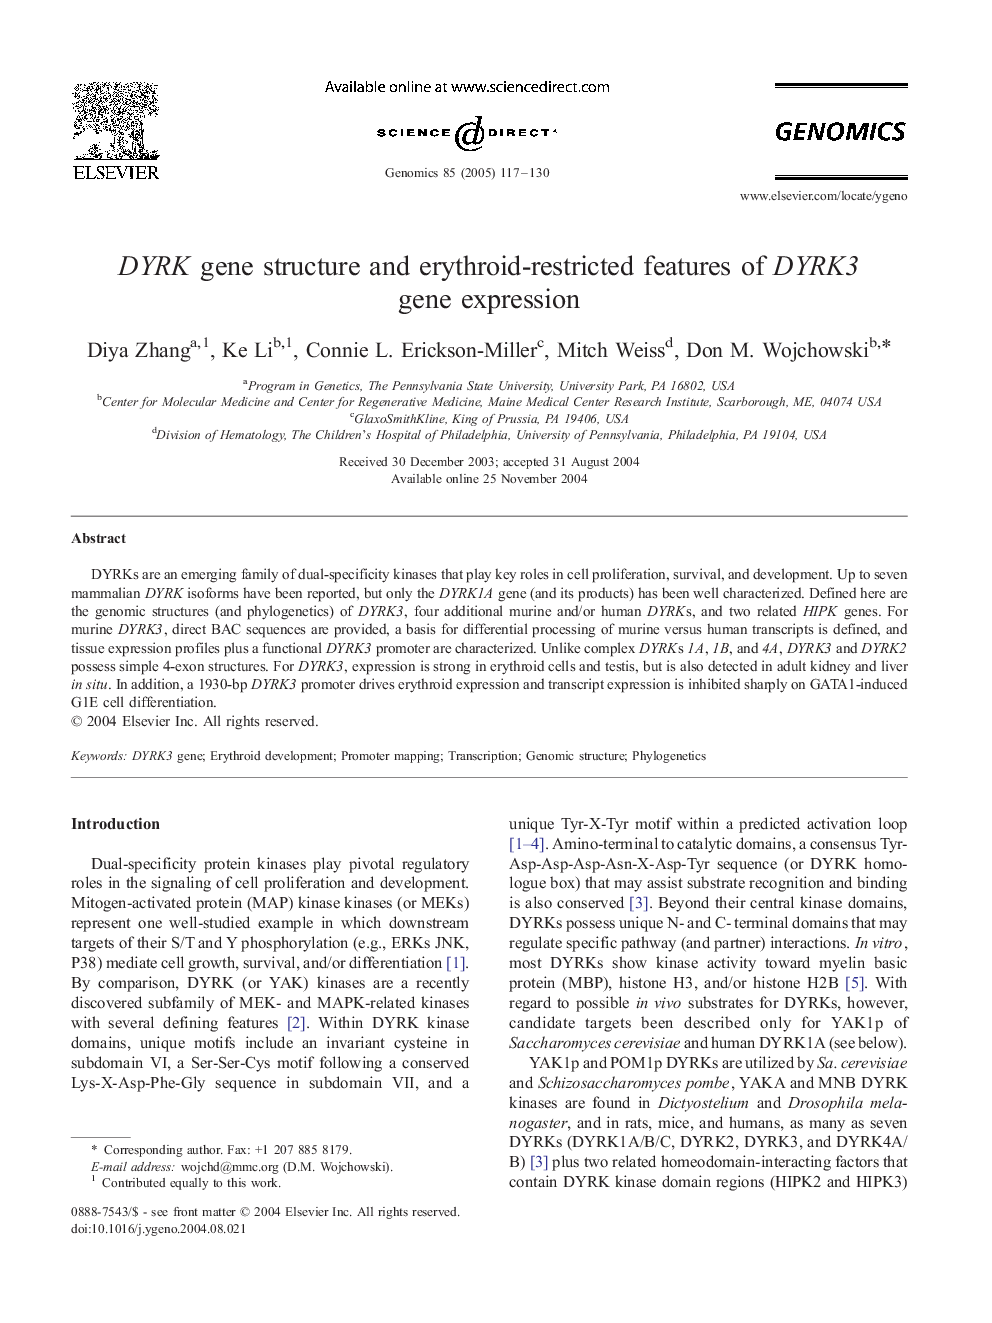 DYRK gene structure and erythroid-restricted features of DYRK3 gene expression